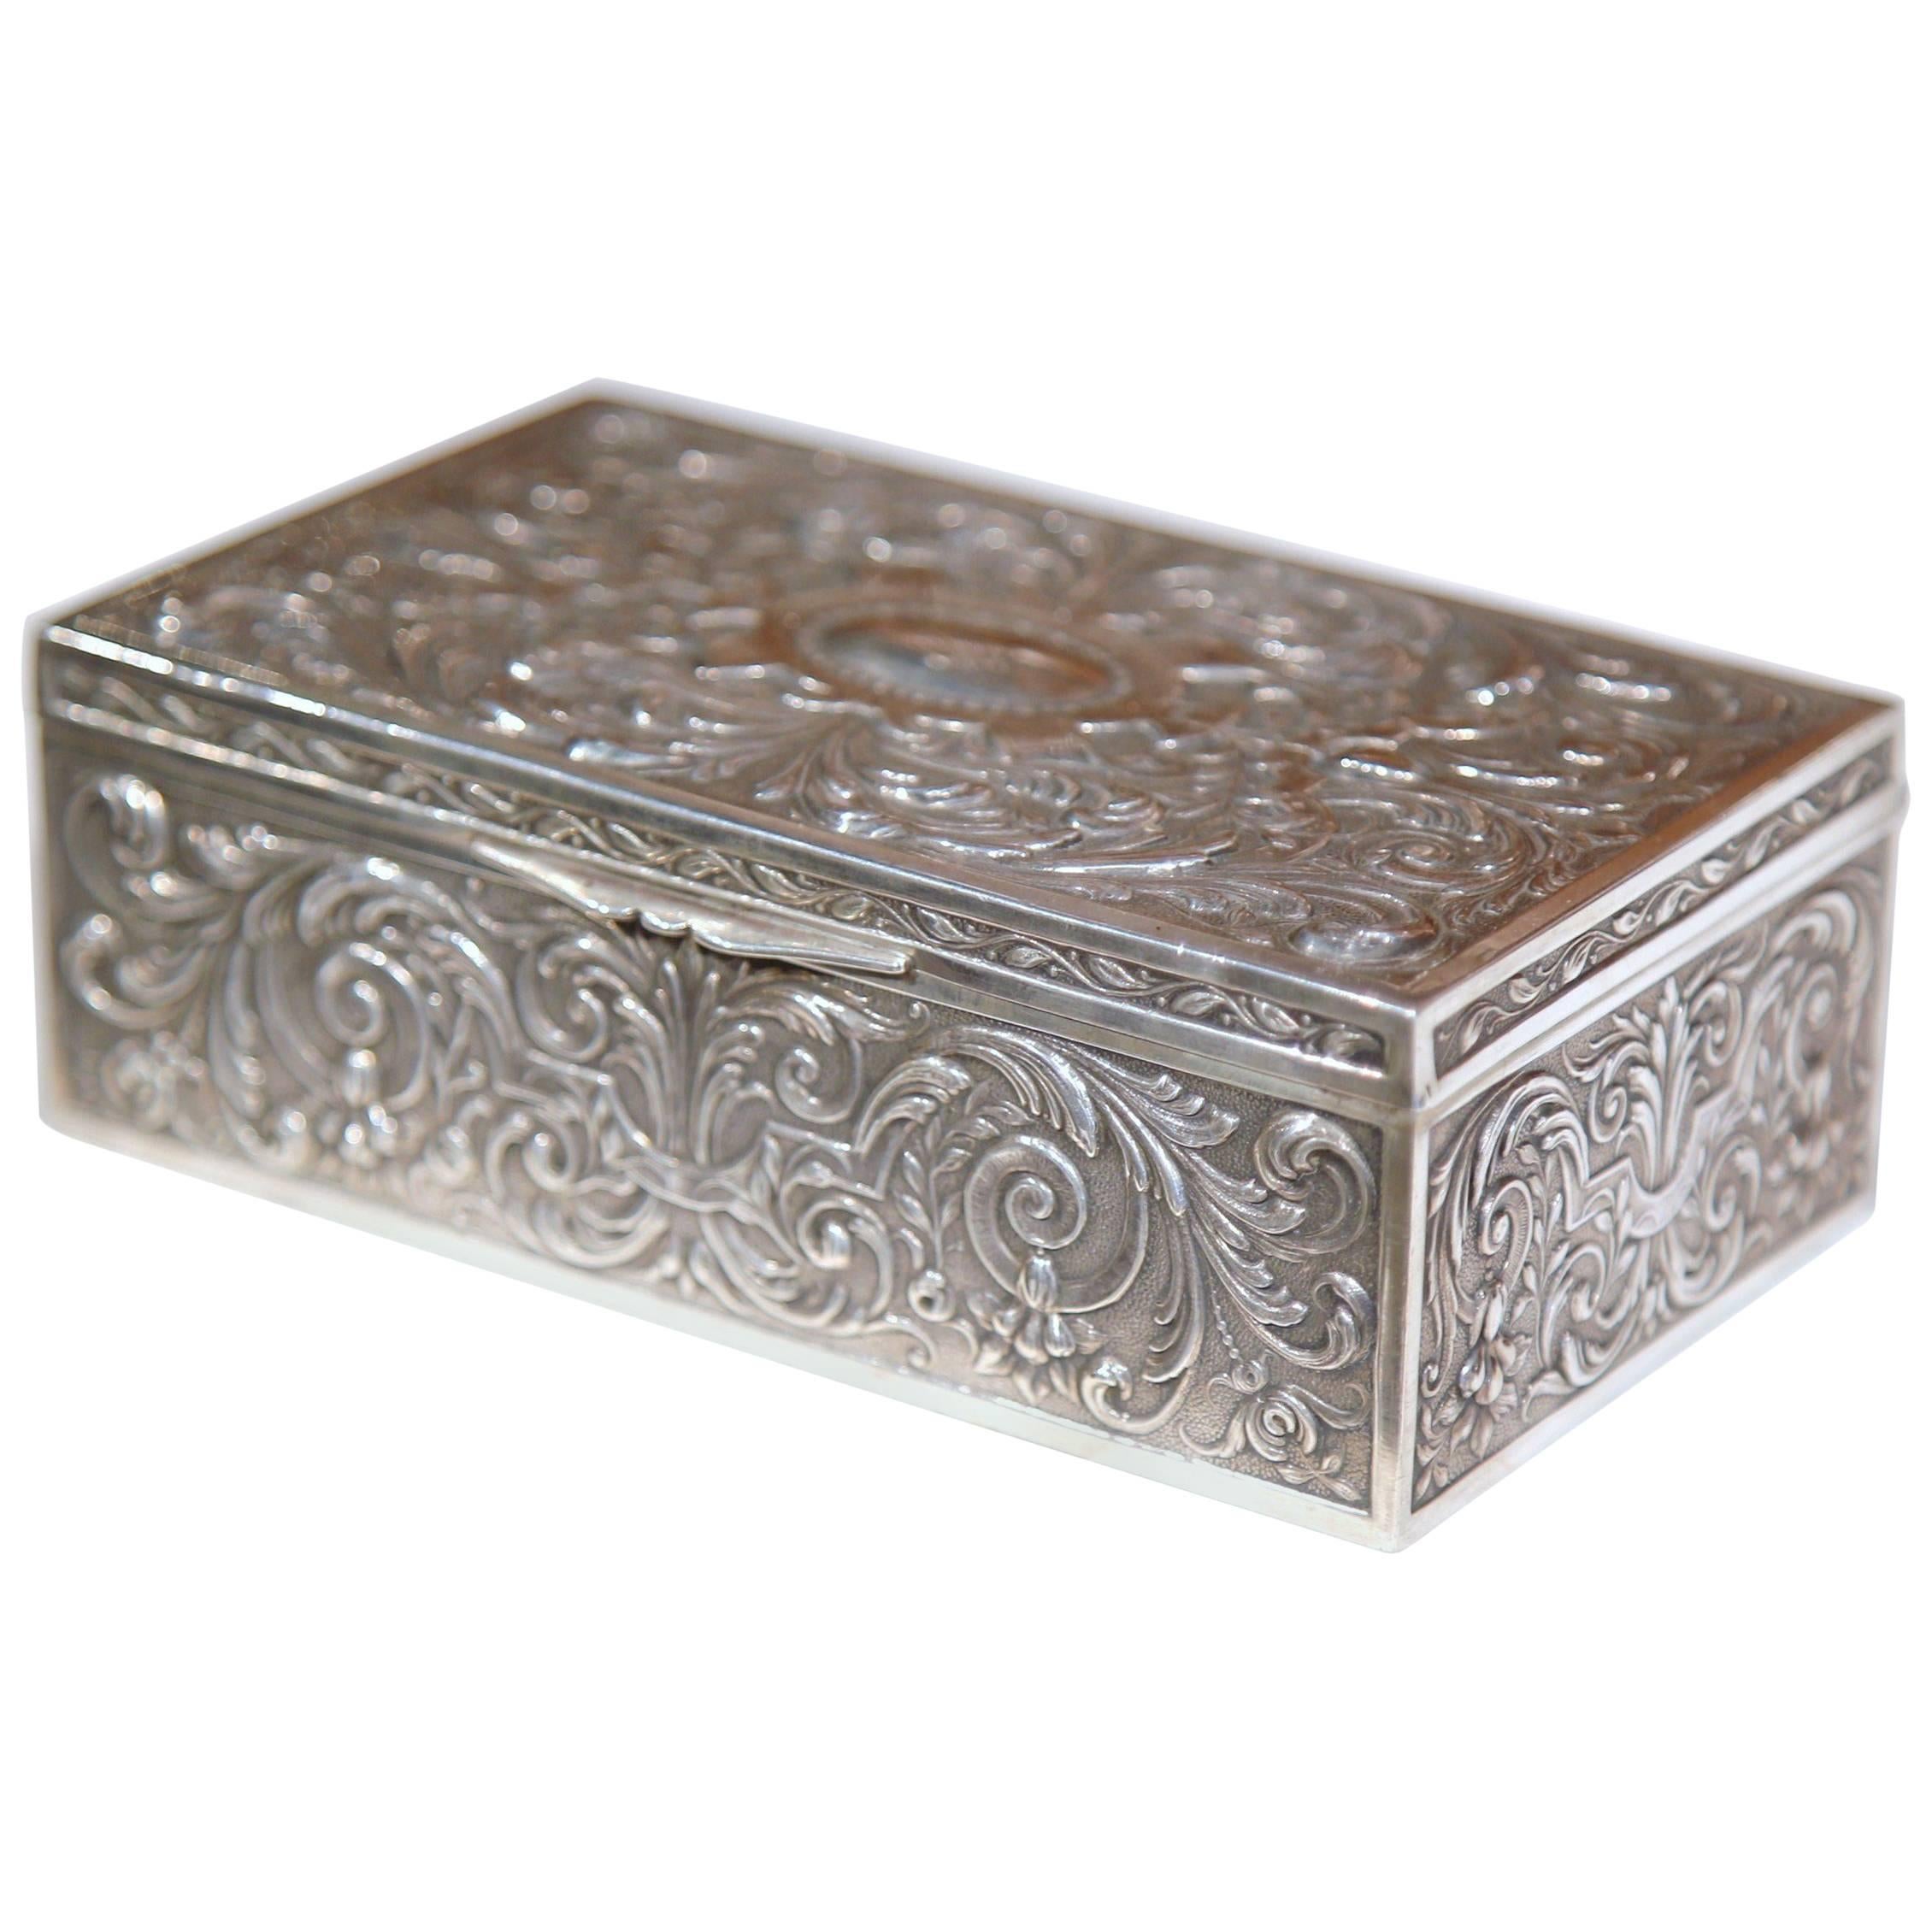 19th Century French Wooden Repousse Silver Plated Jewelry Box